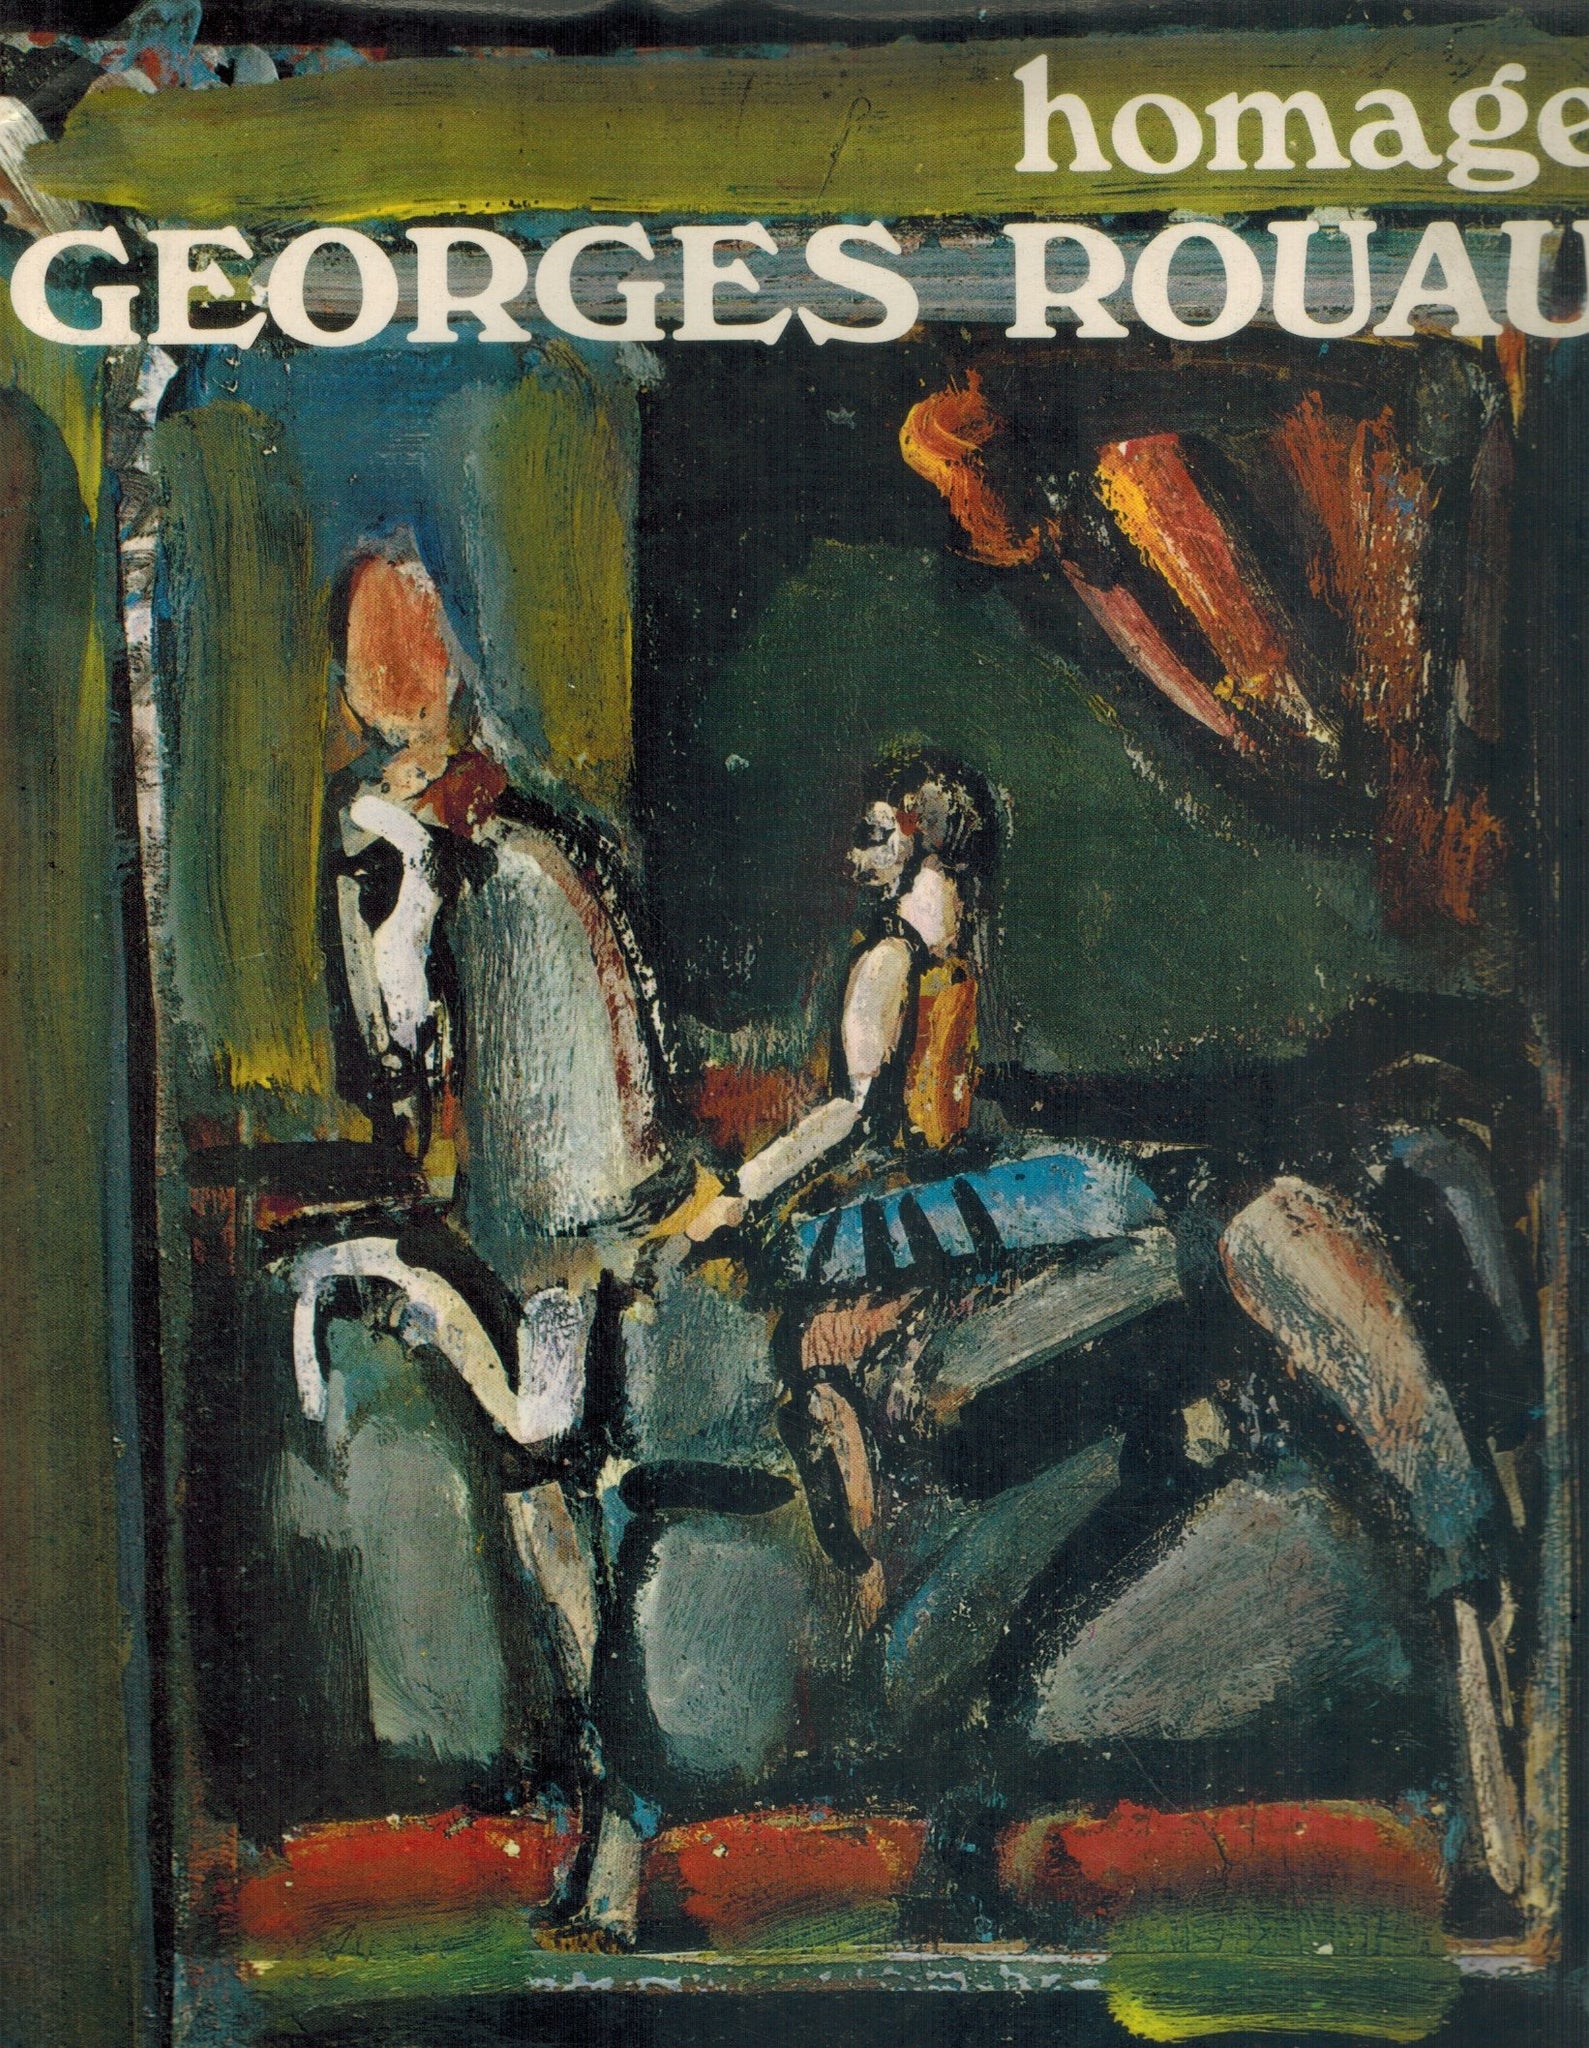 HOMAGE TO GEORGES ROUAULT  by Di San Lazzaro, G.